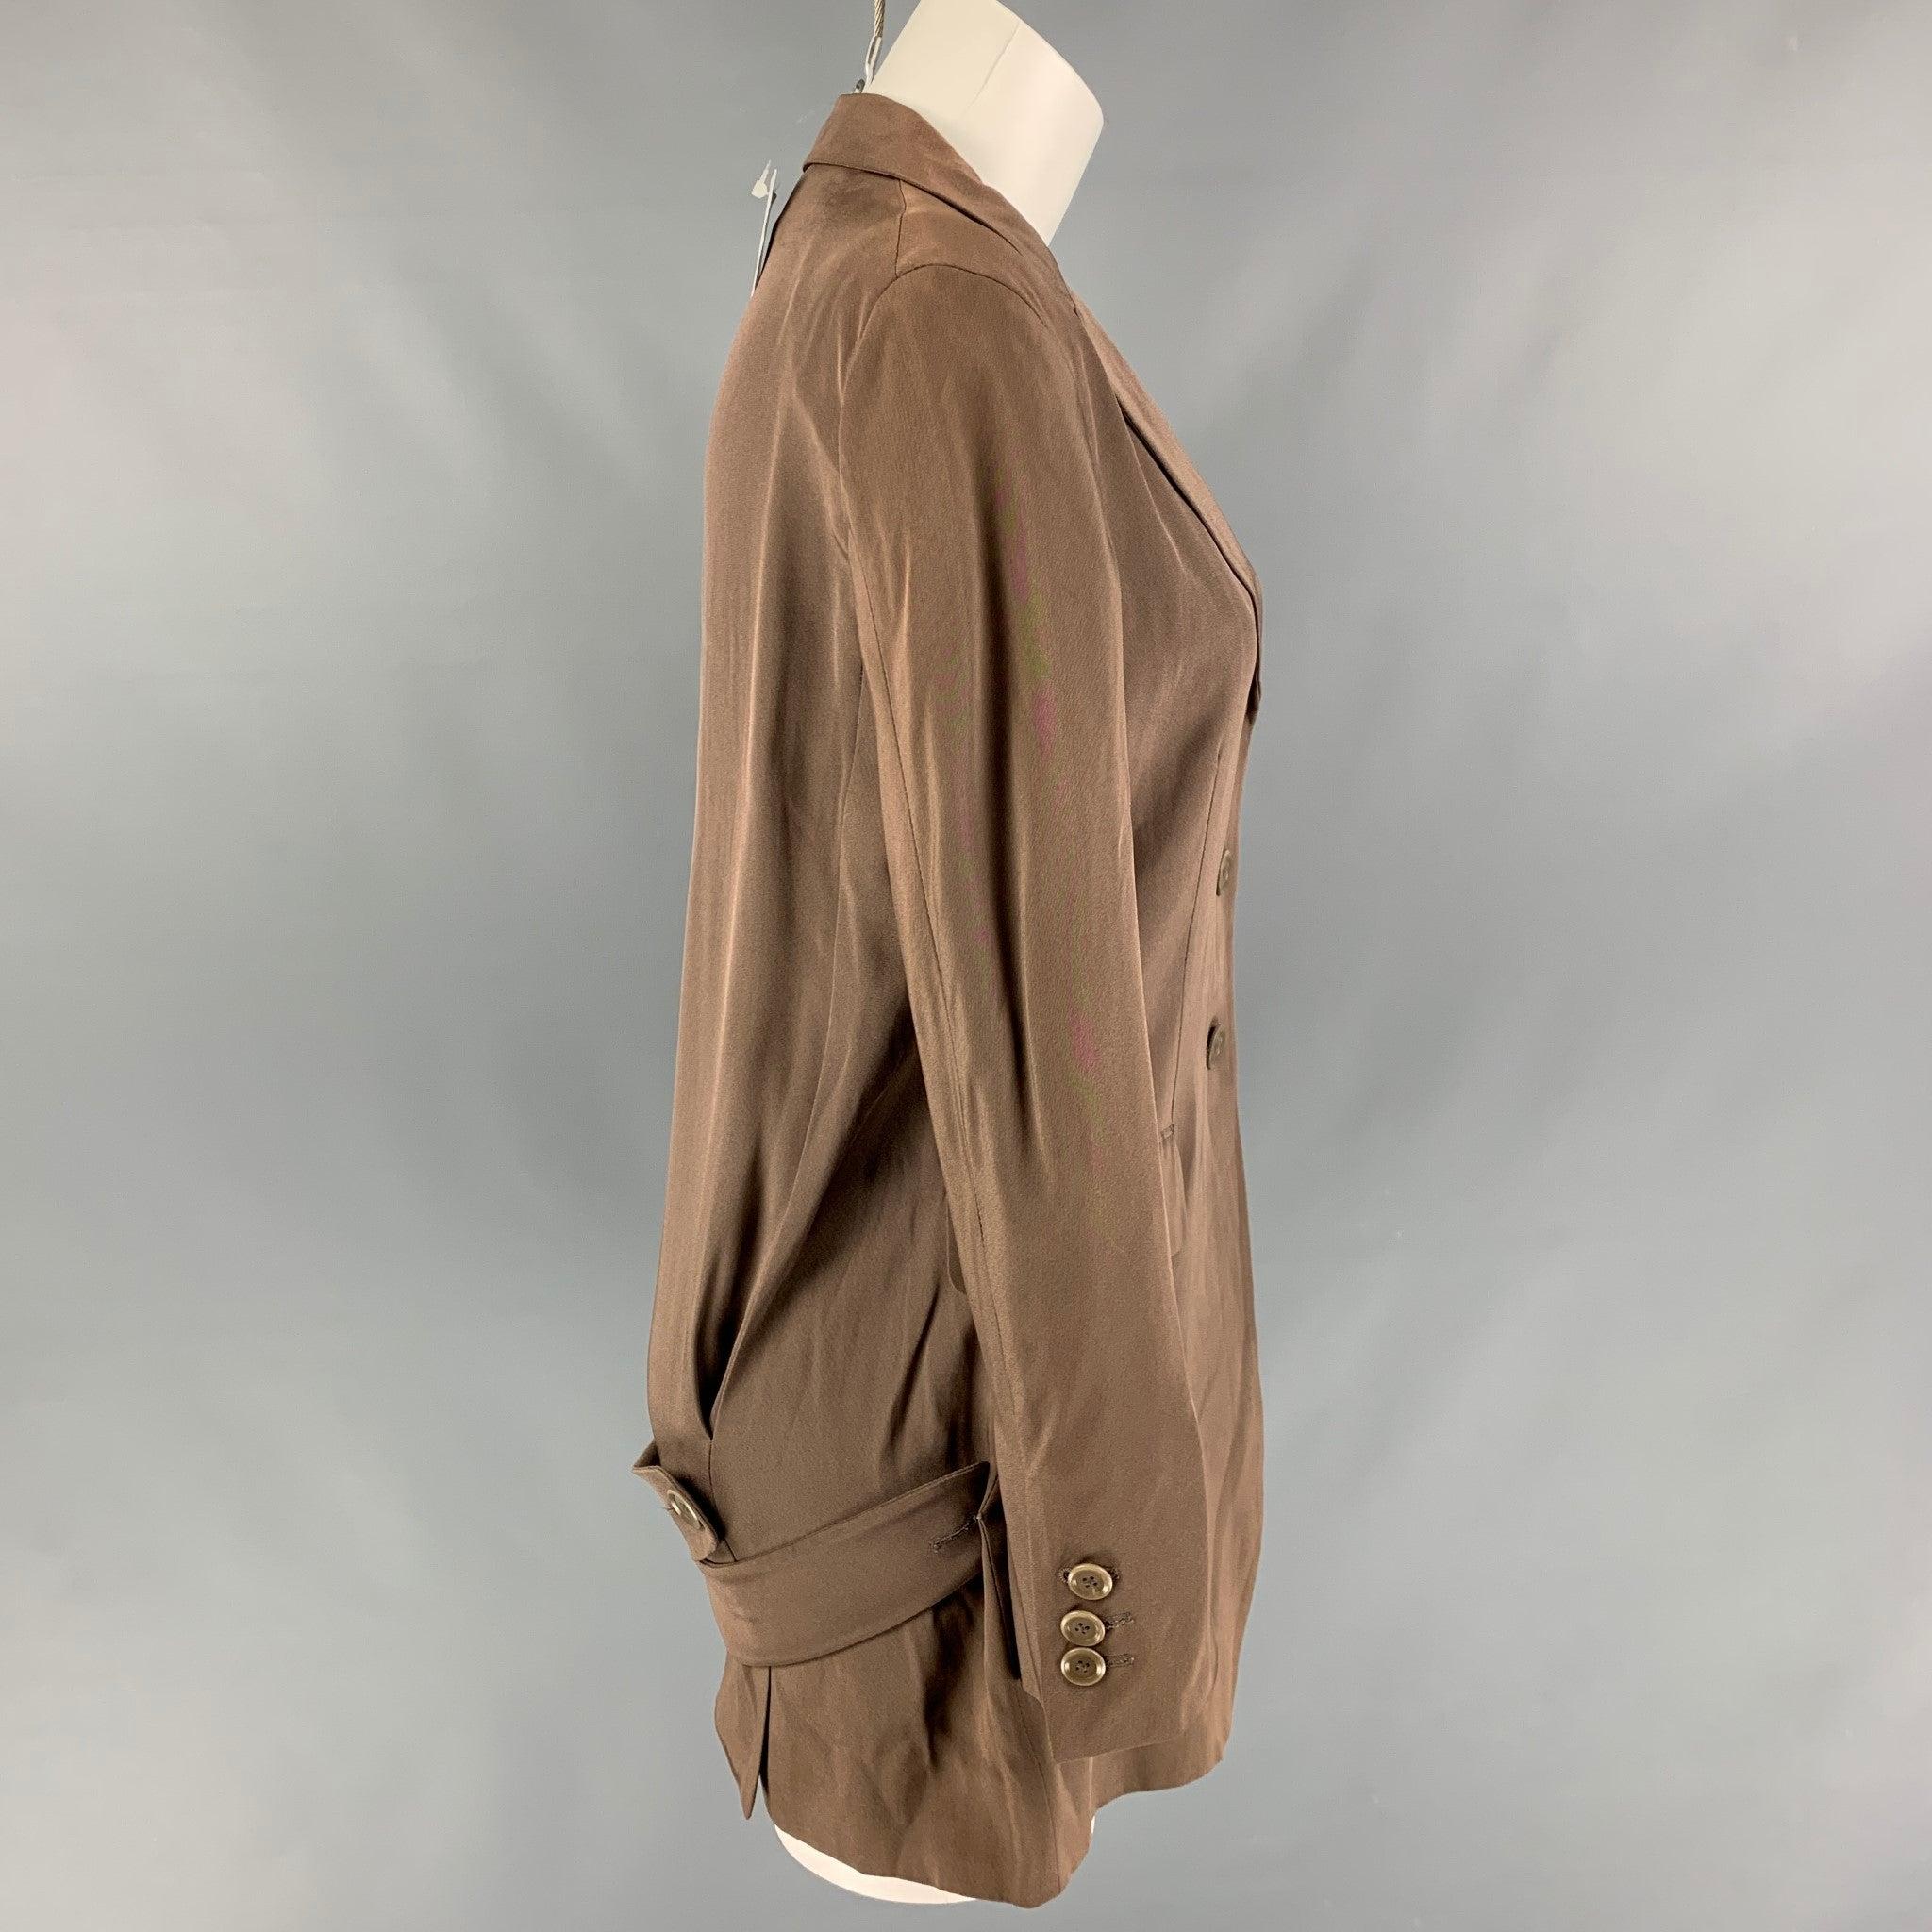 MOSCHINO blazer comes in taupe acetate blend fabric featuring notch lapel, single breast three button closure, two frontal pockets with gore, and double belt at back. Made in Italy.New With Tags 
 

 Marked:  8 
 

 Measurements: 
  
 Shoulder: 16.5